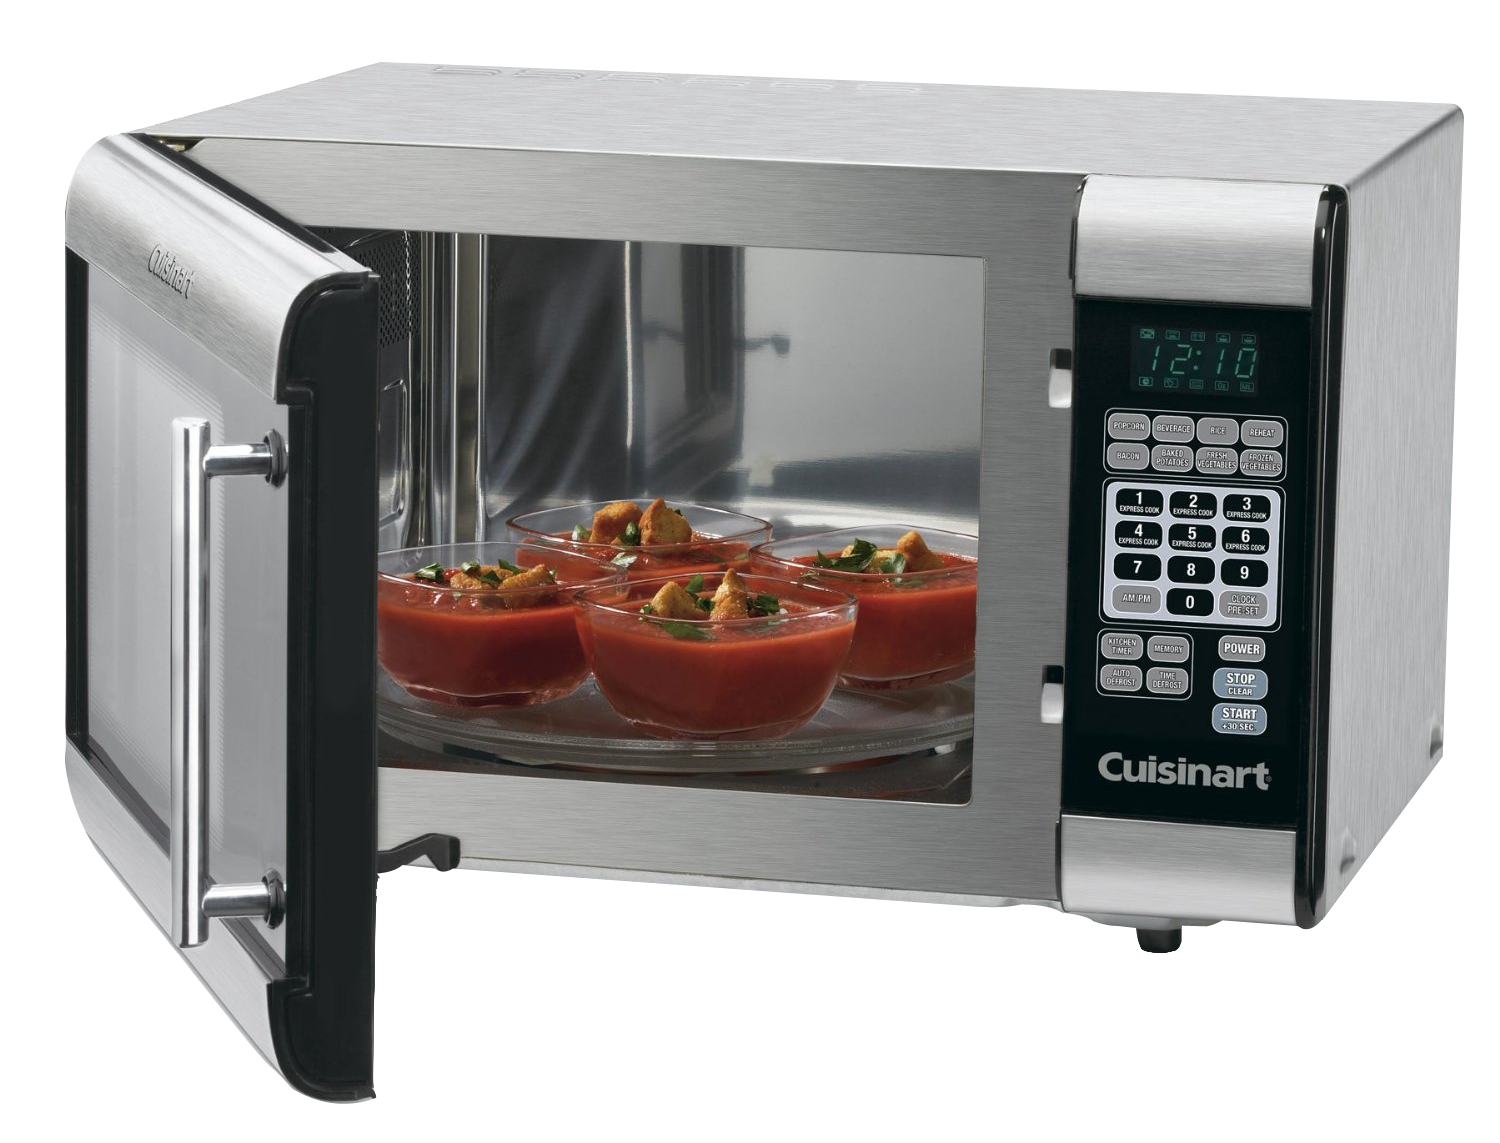 Microwave Oven Transparent PNG